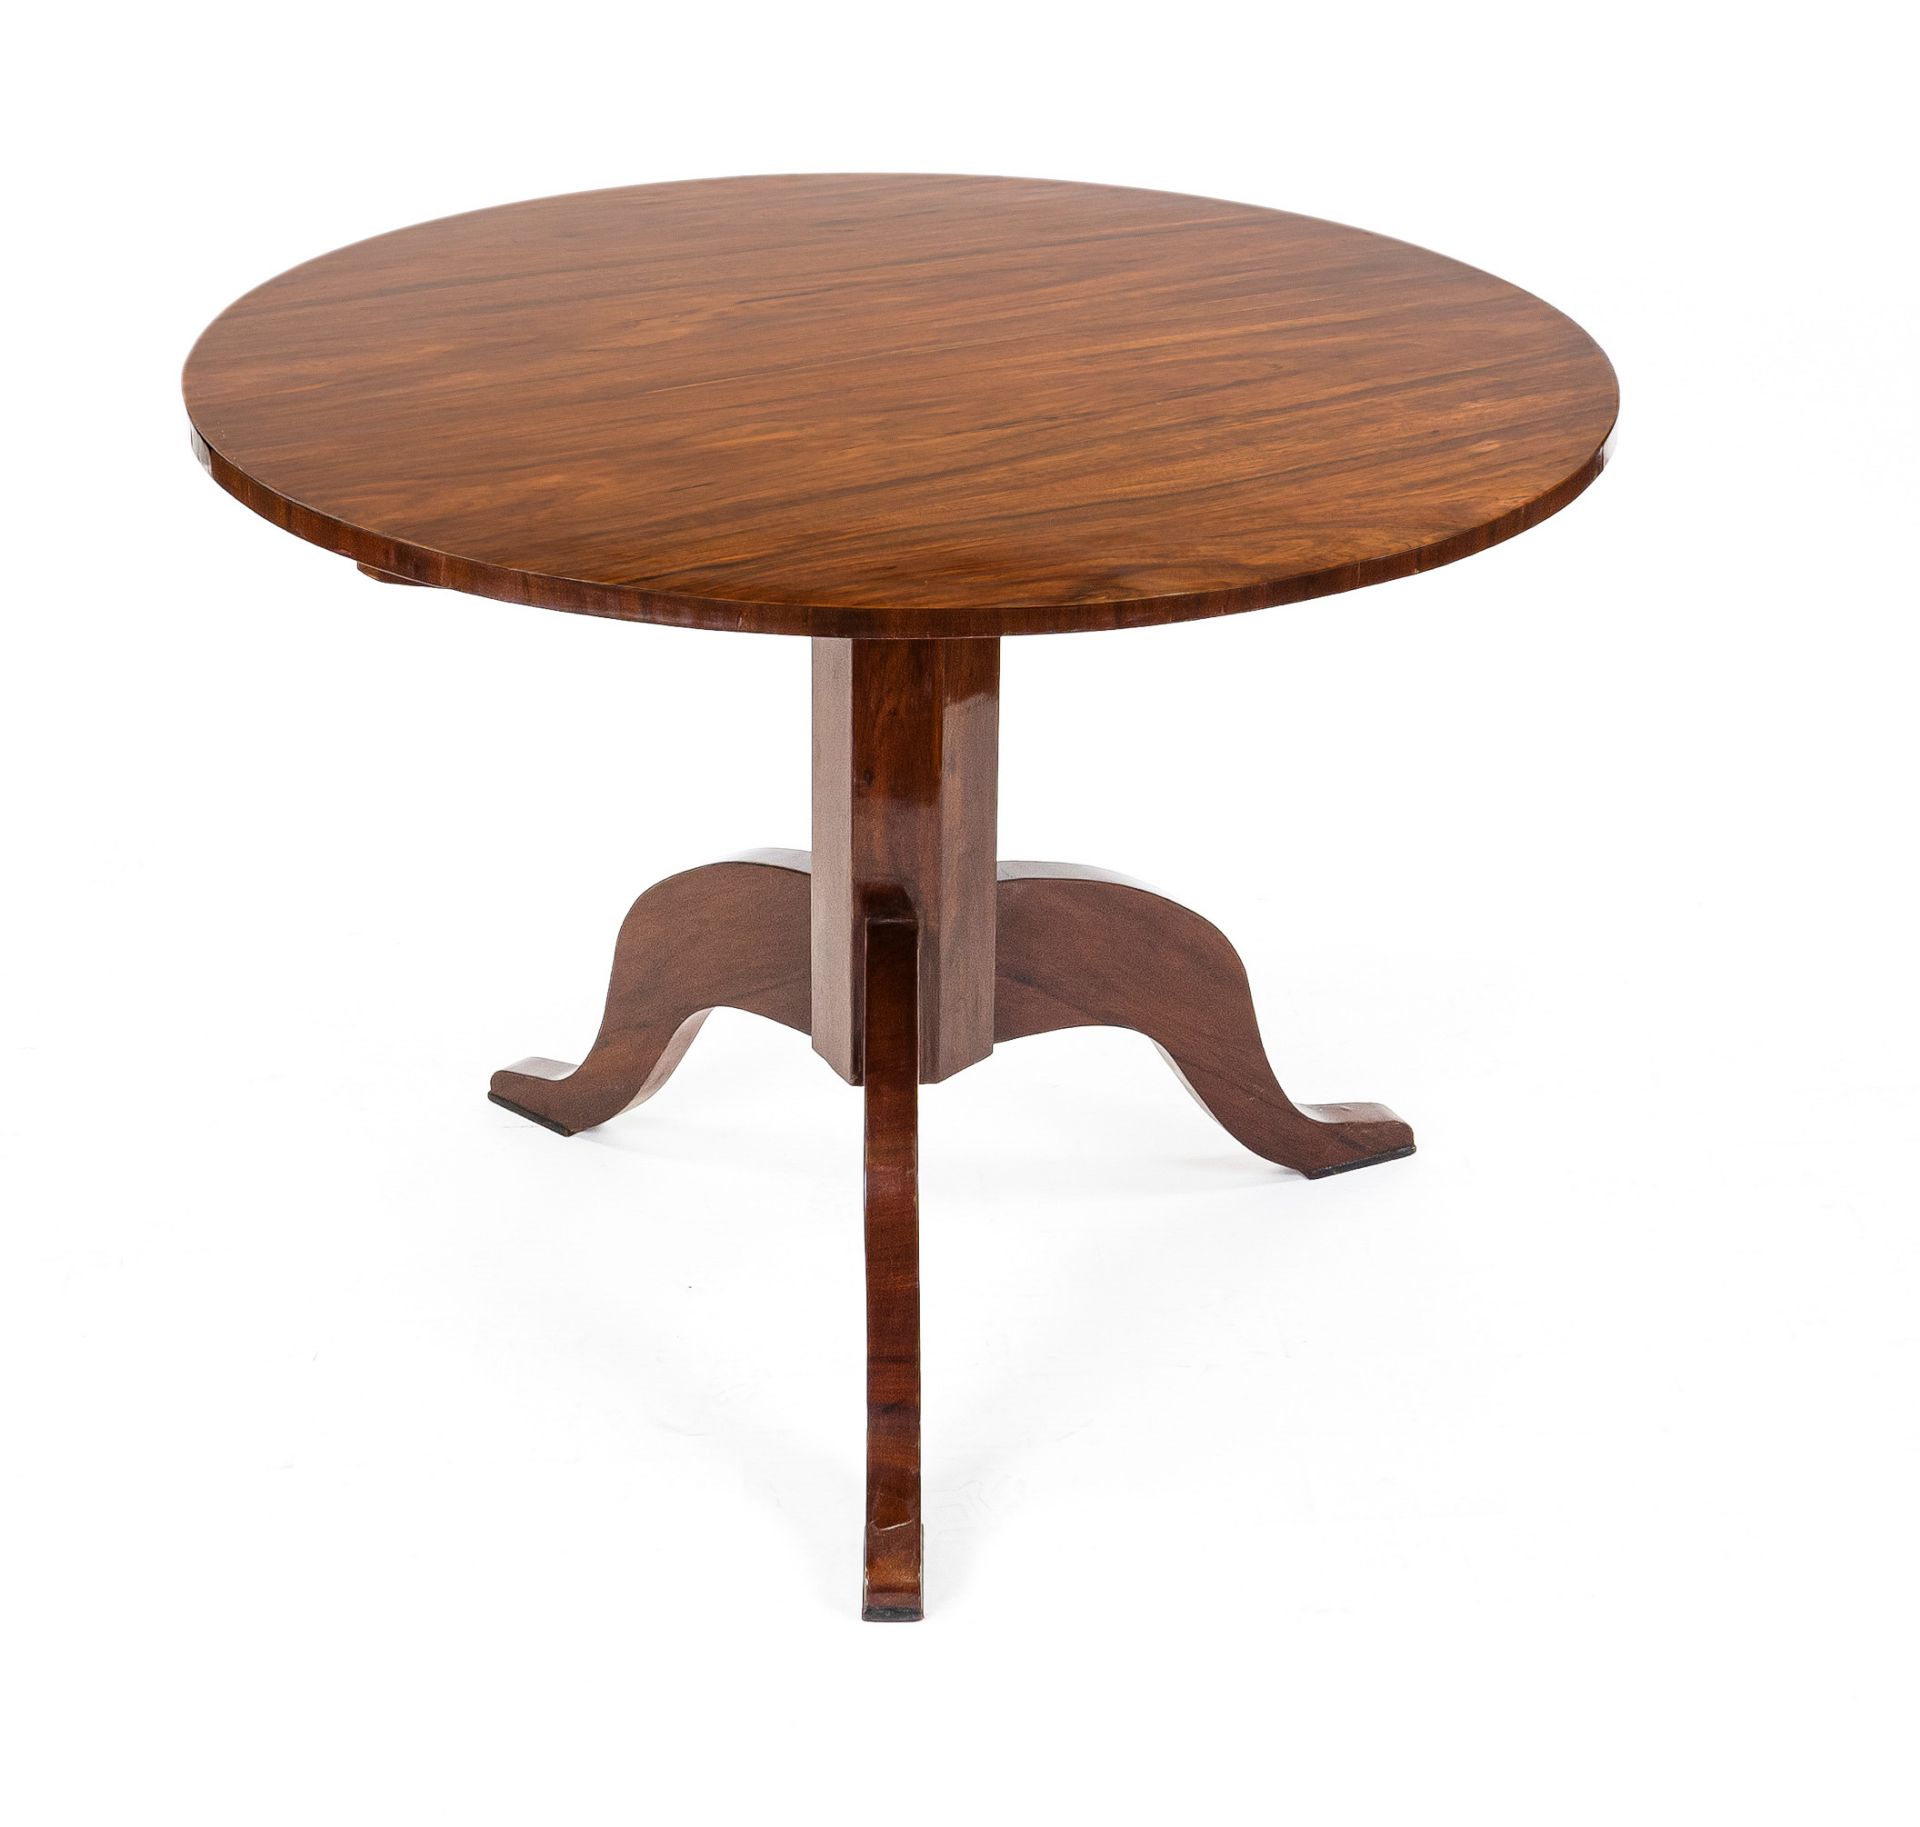 Round table in the Biedermeier style, 20th century, mahogany, octagonal central column on three